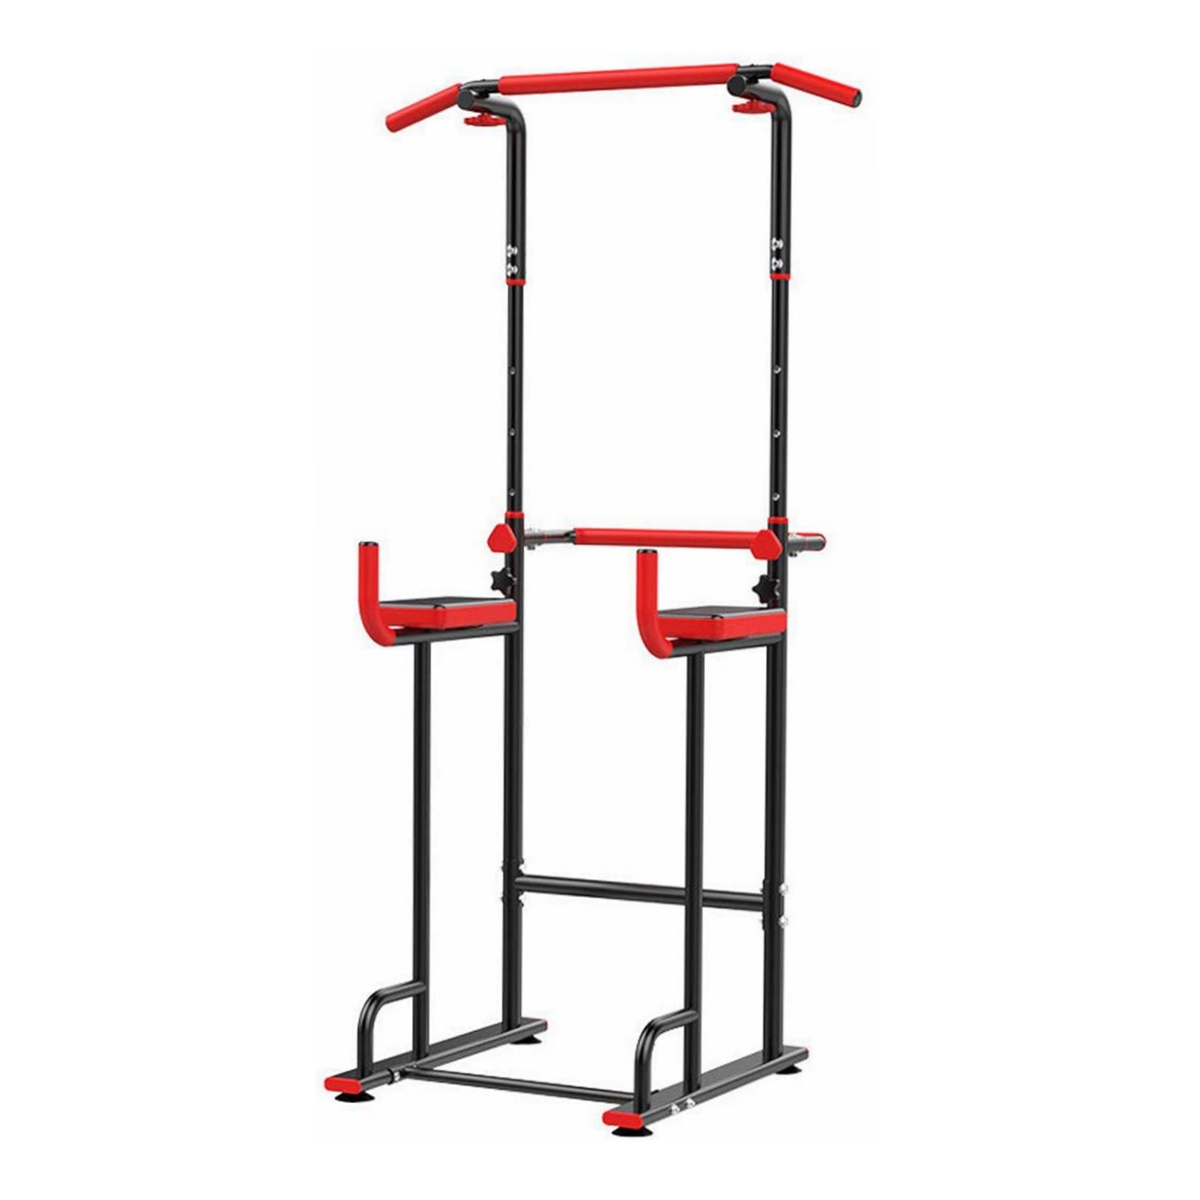 SINGES Power Tower Adjustable Height Pull Up & Dip Station Home Gym Exercise Workout Station - image 3 of 9